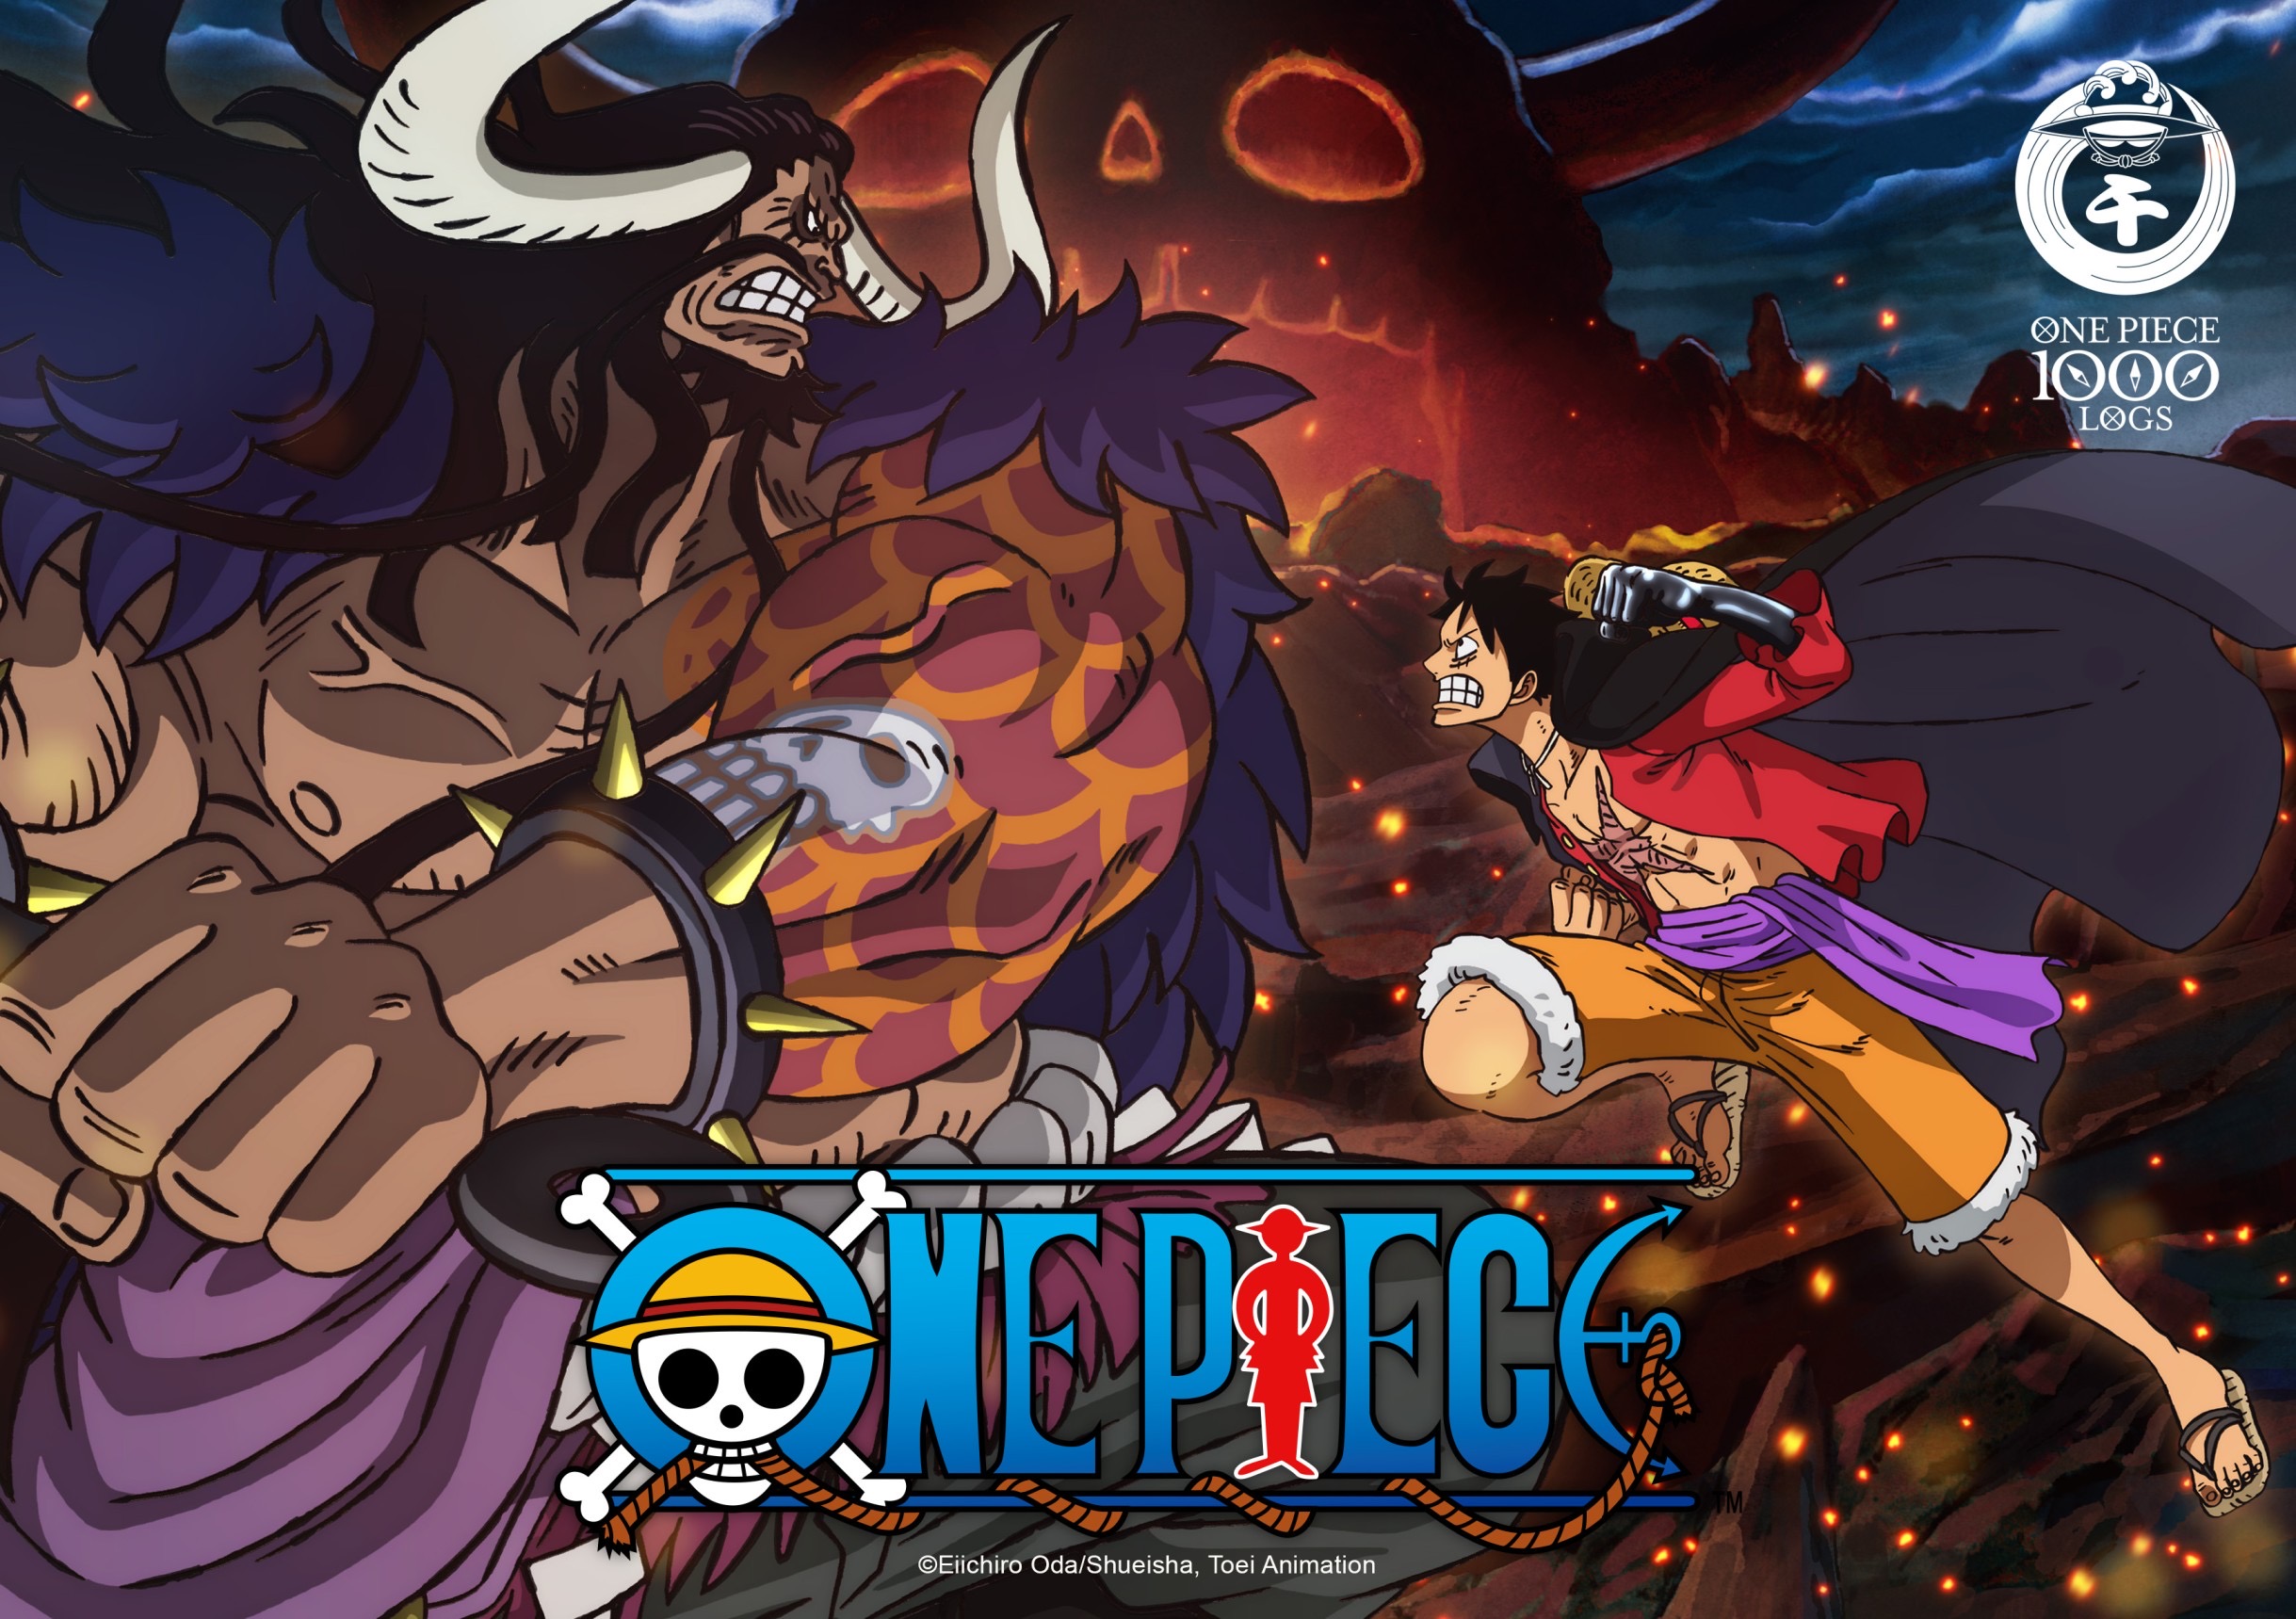 Toei Animation Behold The 1000 Episode Epic Teaser Art For One Piece Onepiece1000logs Onepiece1000 Onepiece T Co Cssbcudovw Twitter